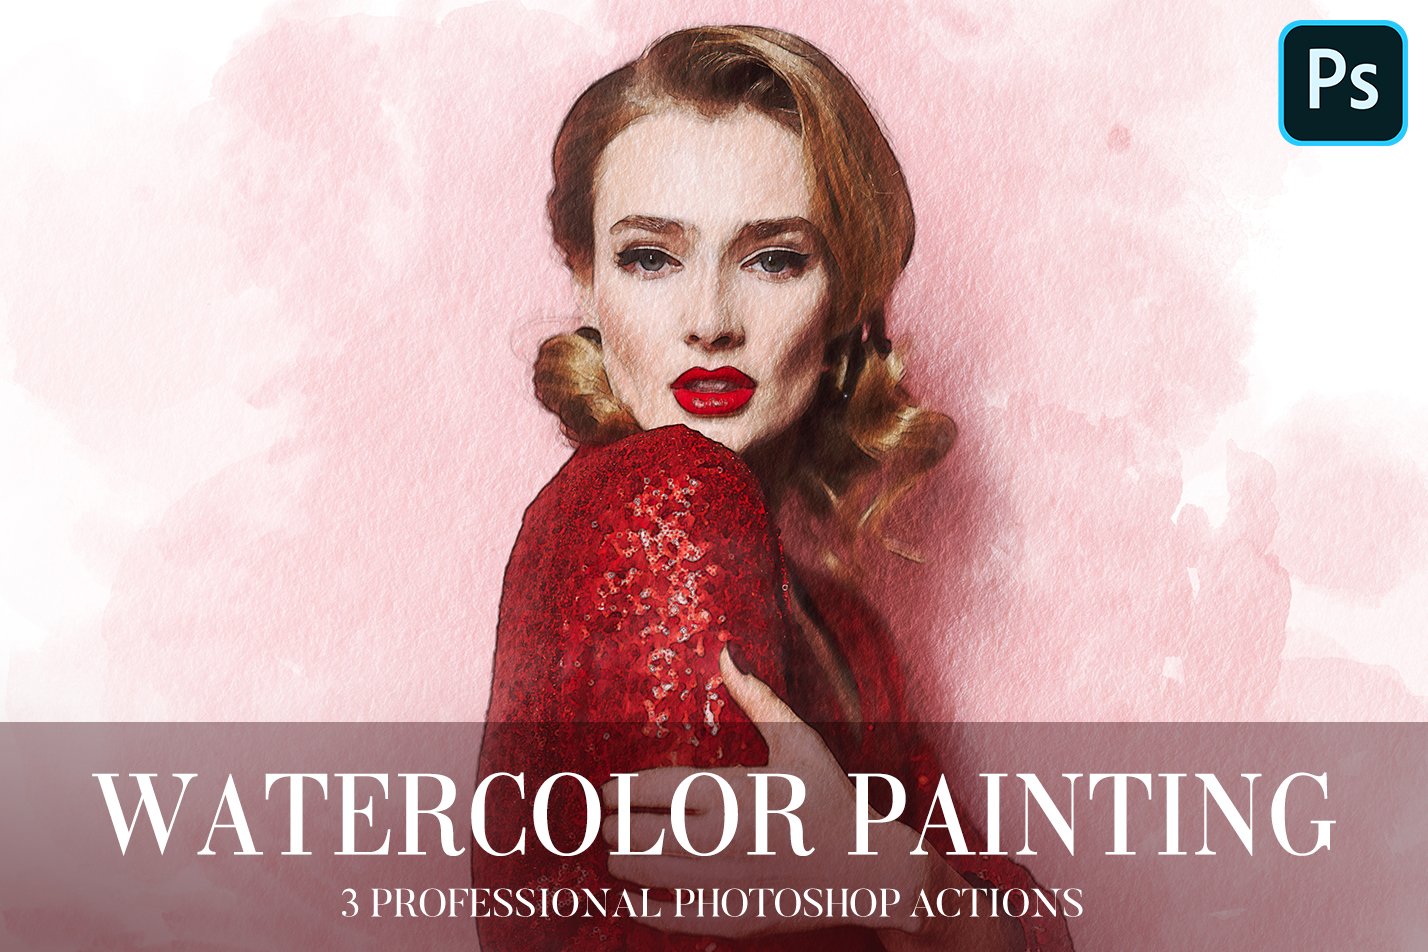 Photoshop Actions - Watercolor Paint cover image.